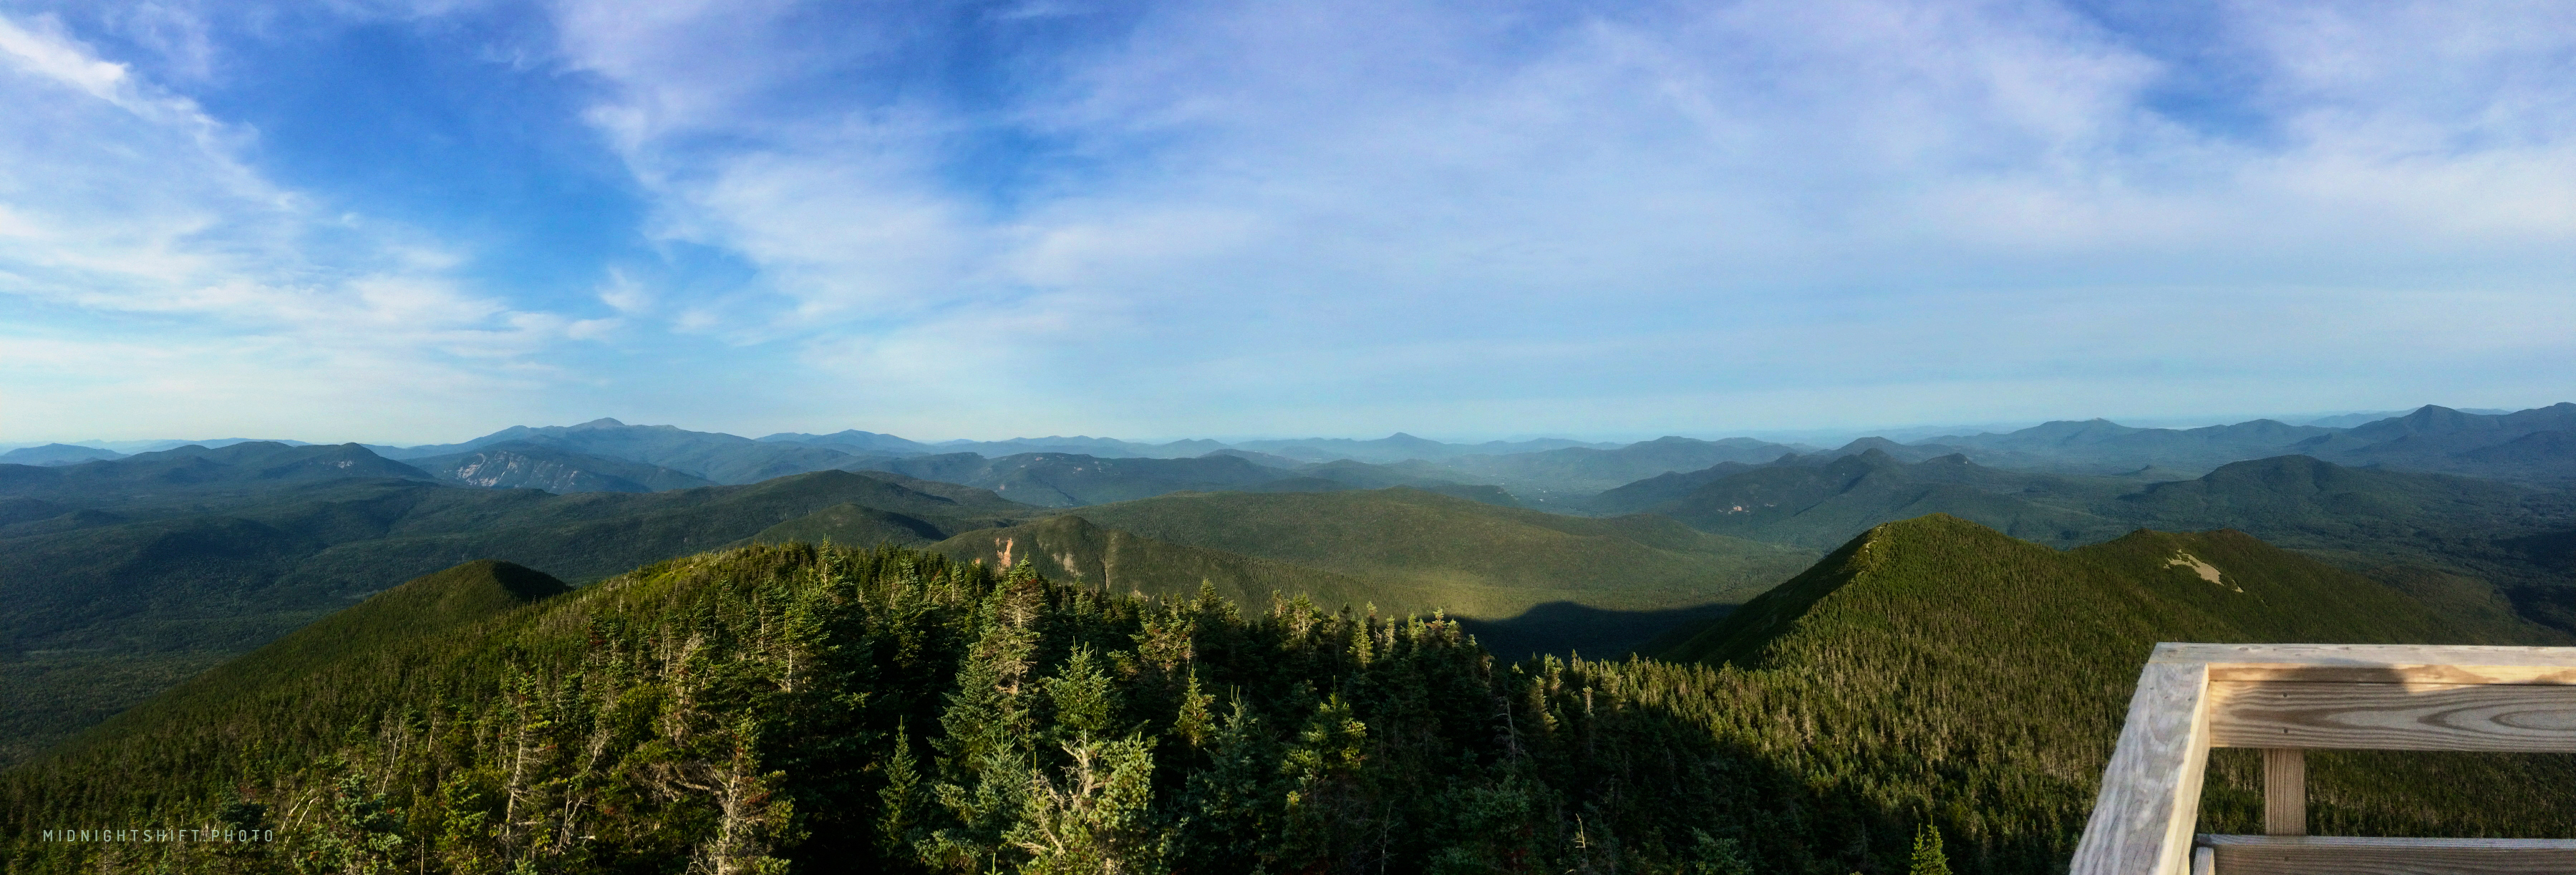 A view of the White Mountains from the fire tower at the summit of Mt. Carrigain